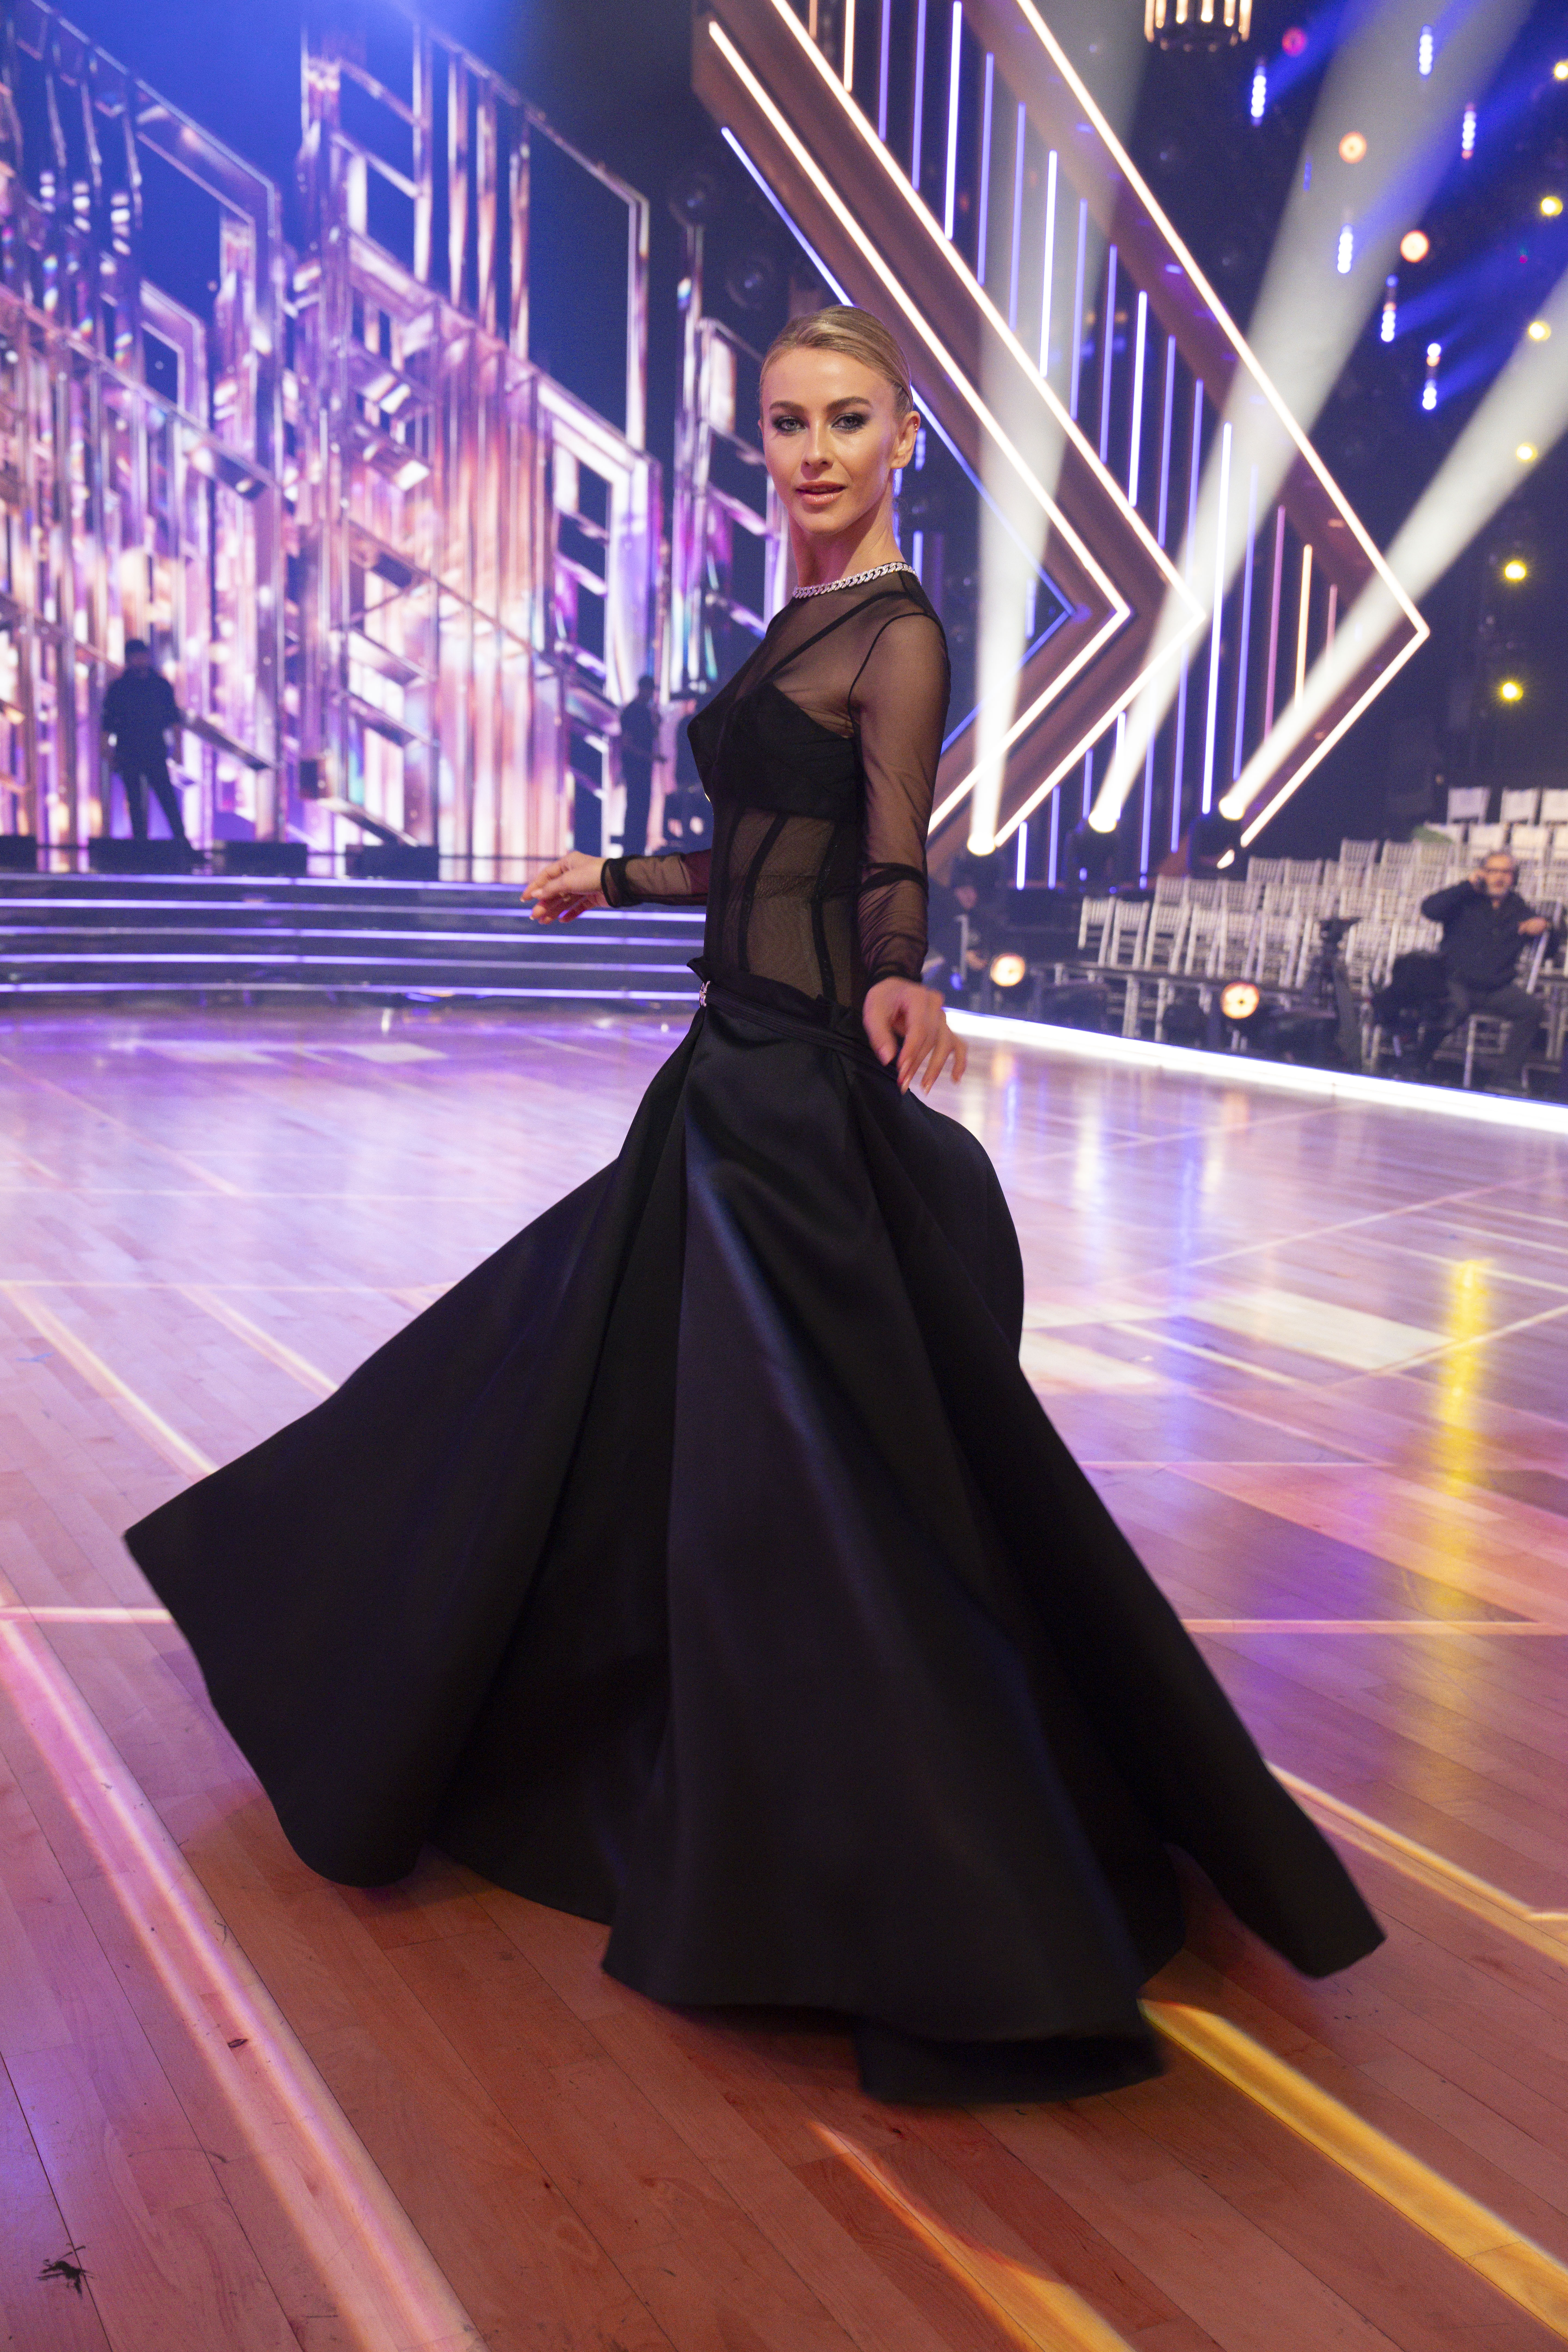 Julianne previously received backlash over her sexy outfits on Dancing With the Stars